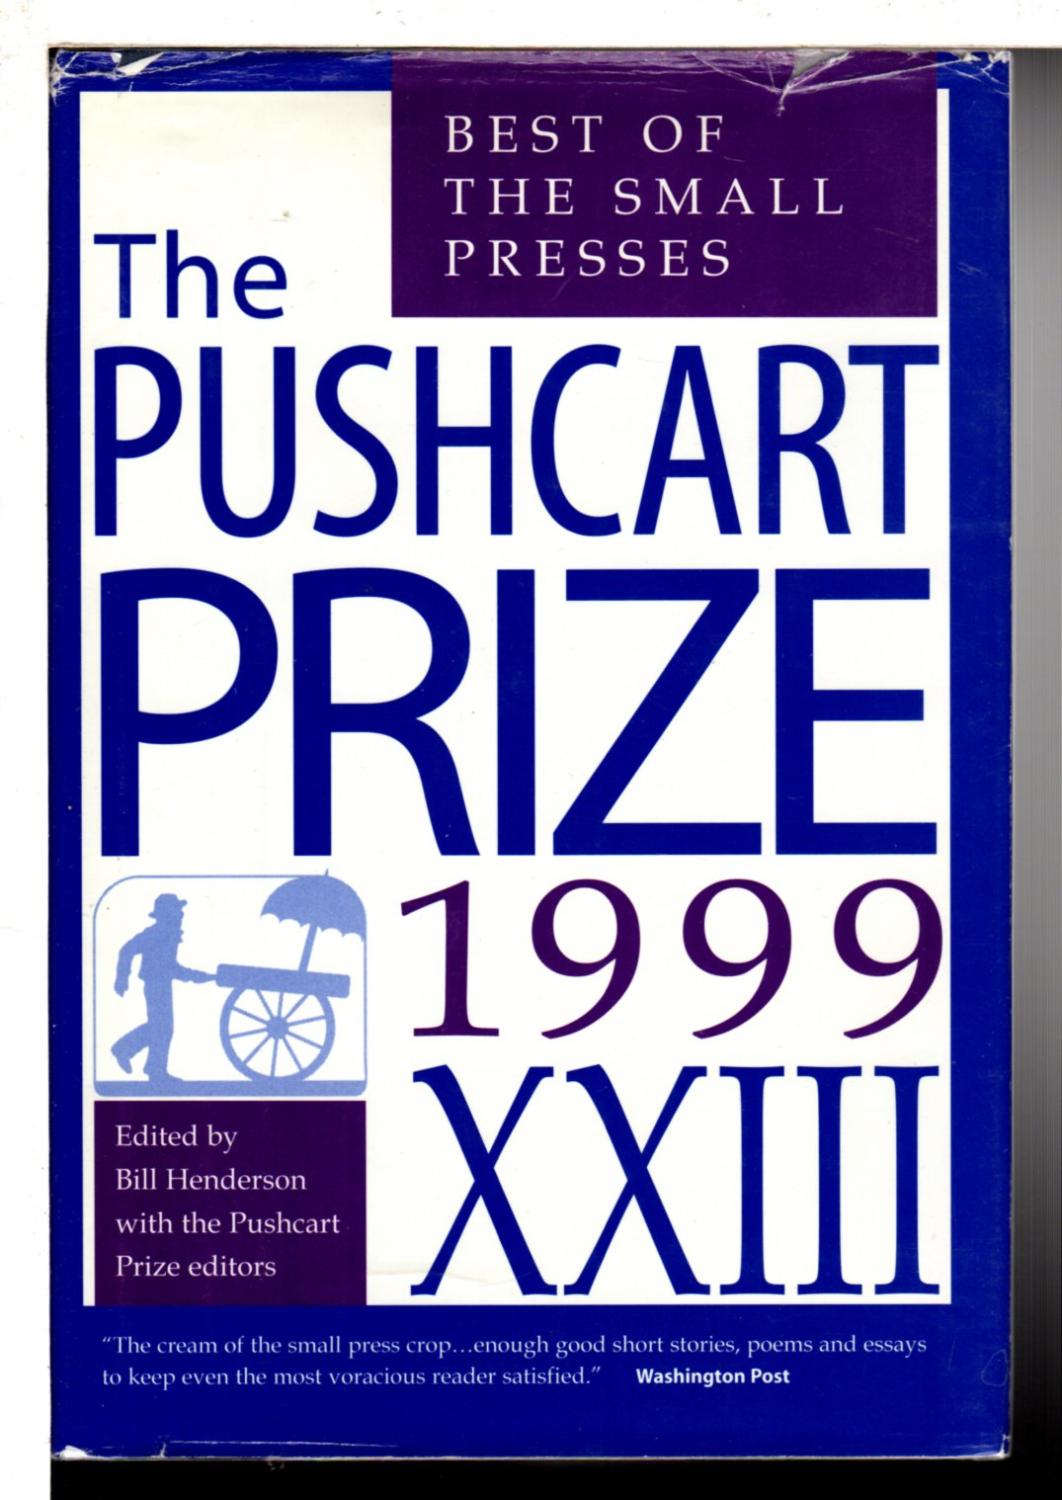 THE PUSHCART PRIZE XXIII: Best of the Small Presses, 1999. - Henderson, Bill, editor.